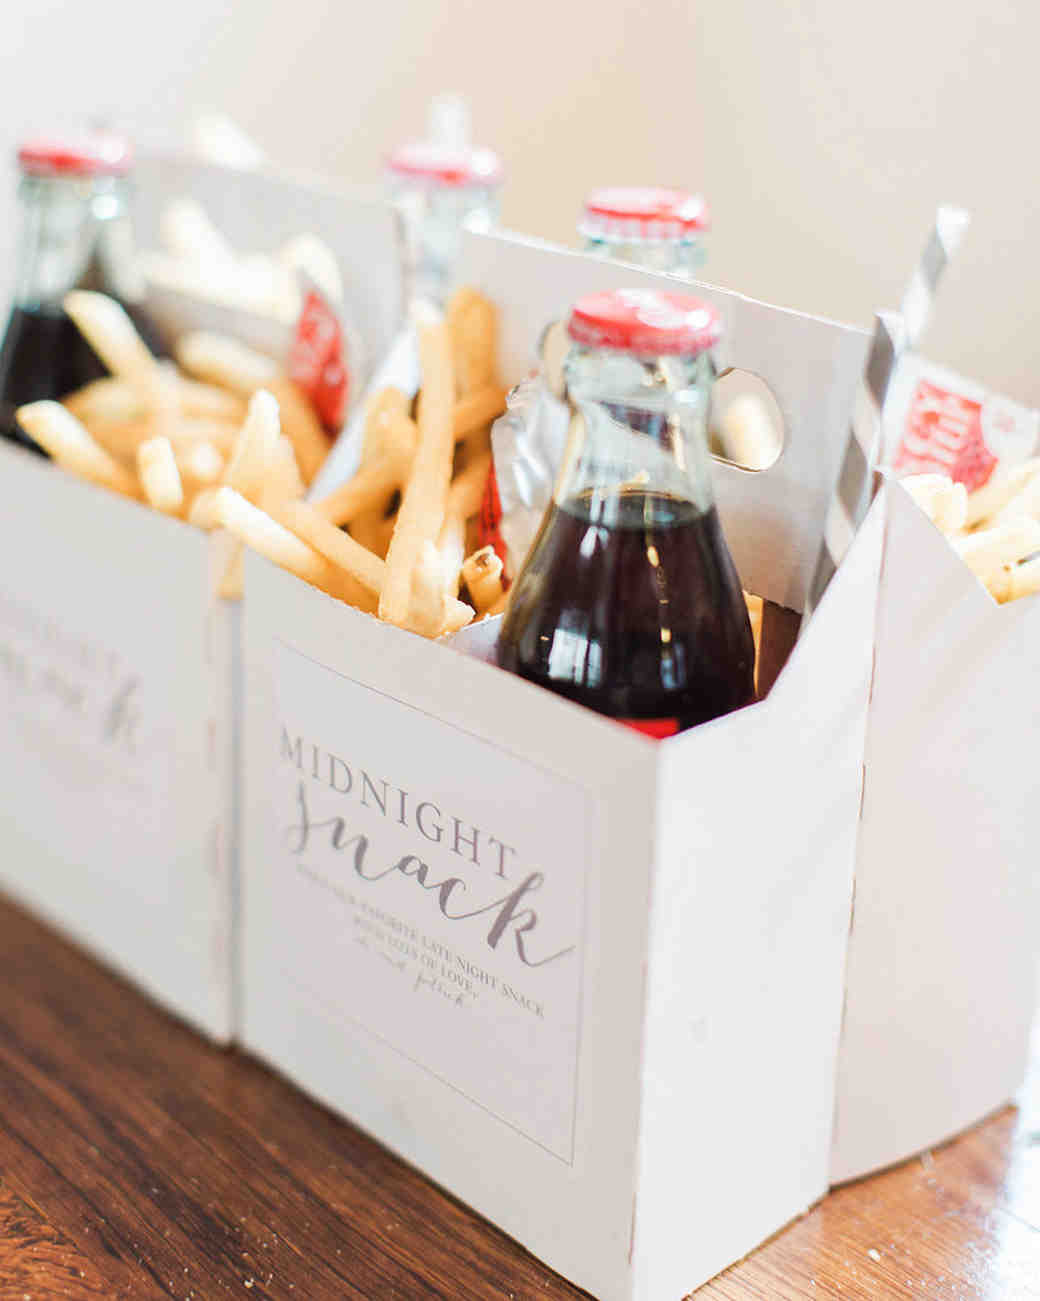 Good Wedding Gifts
 50 Creative Wedding Favors That Will Delight Your Guests